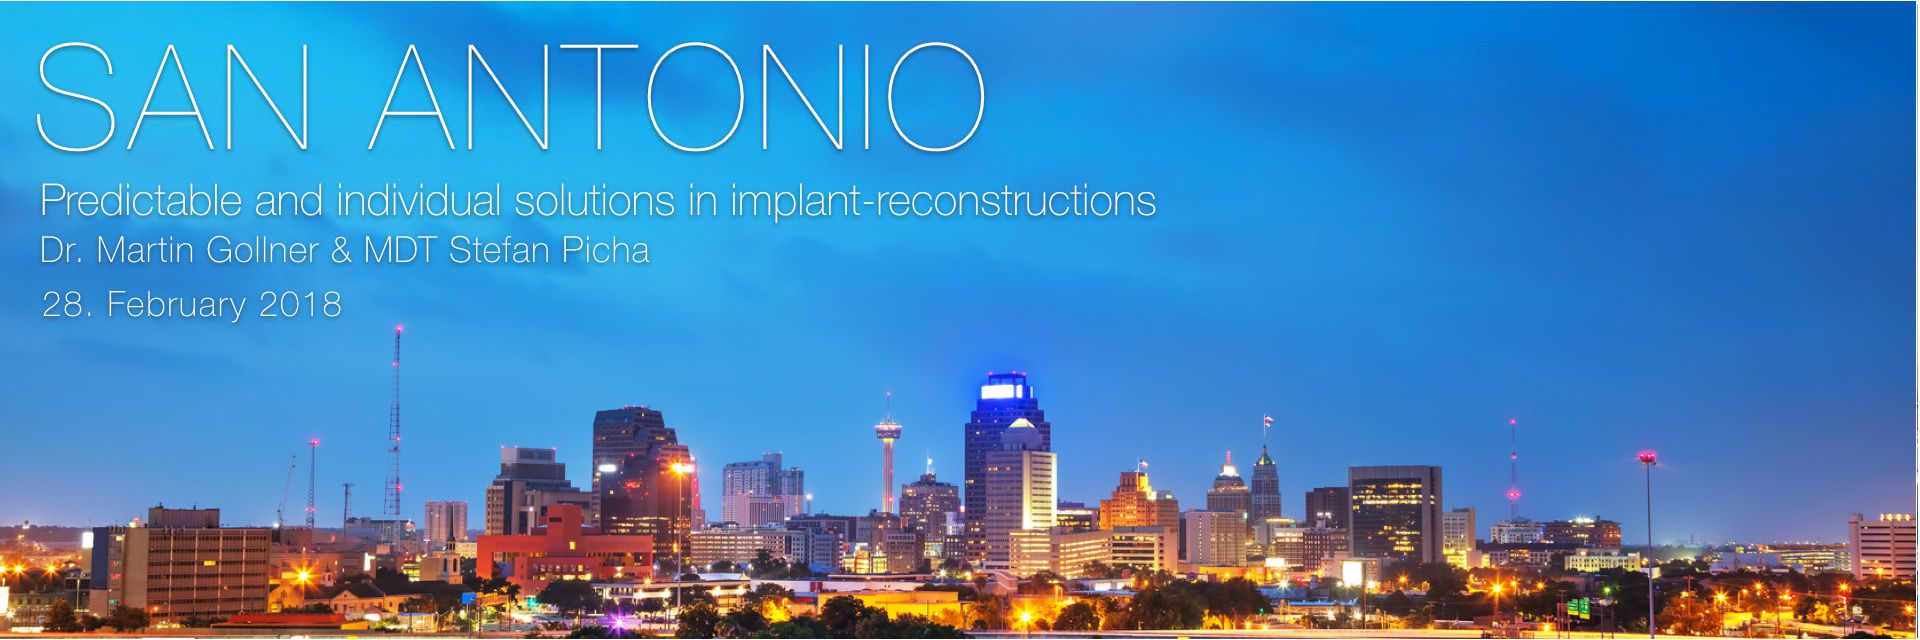 Predictable and individual solutions in implant-reconstructions - San Antonio